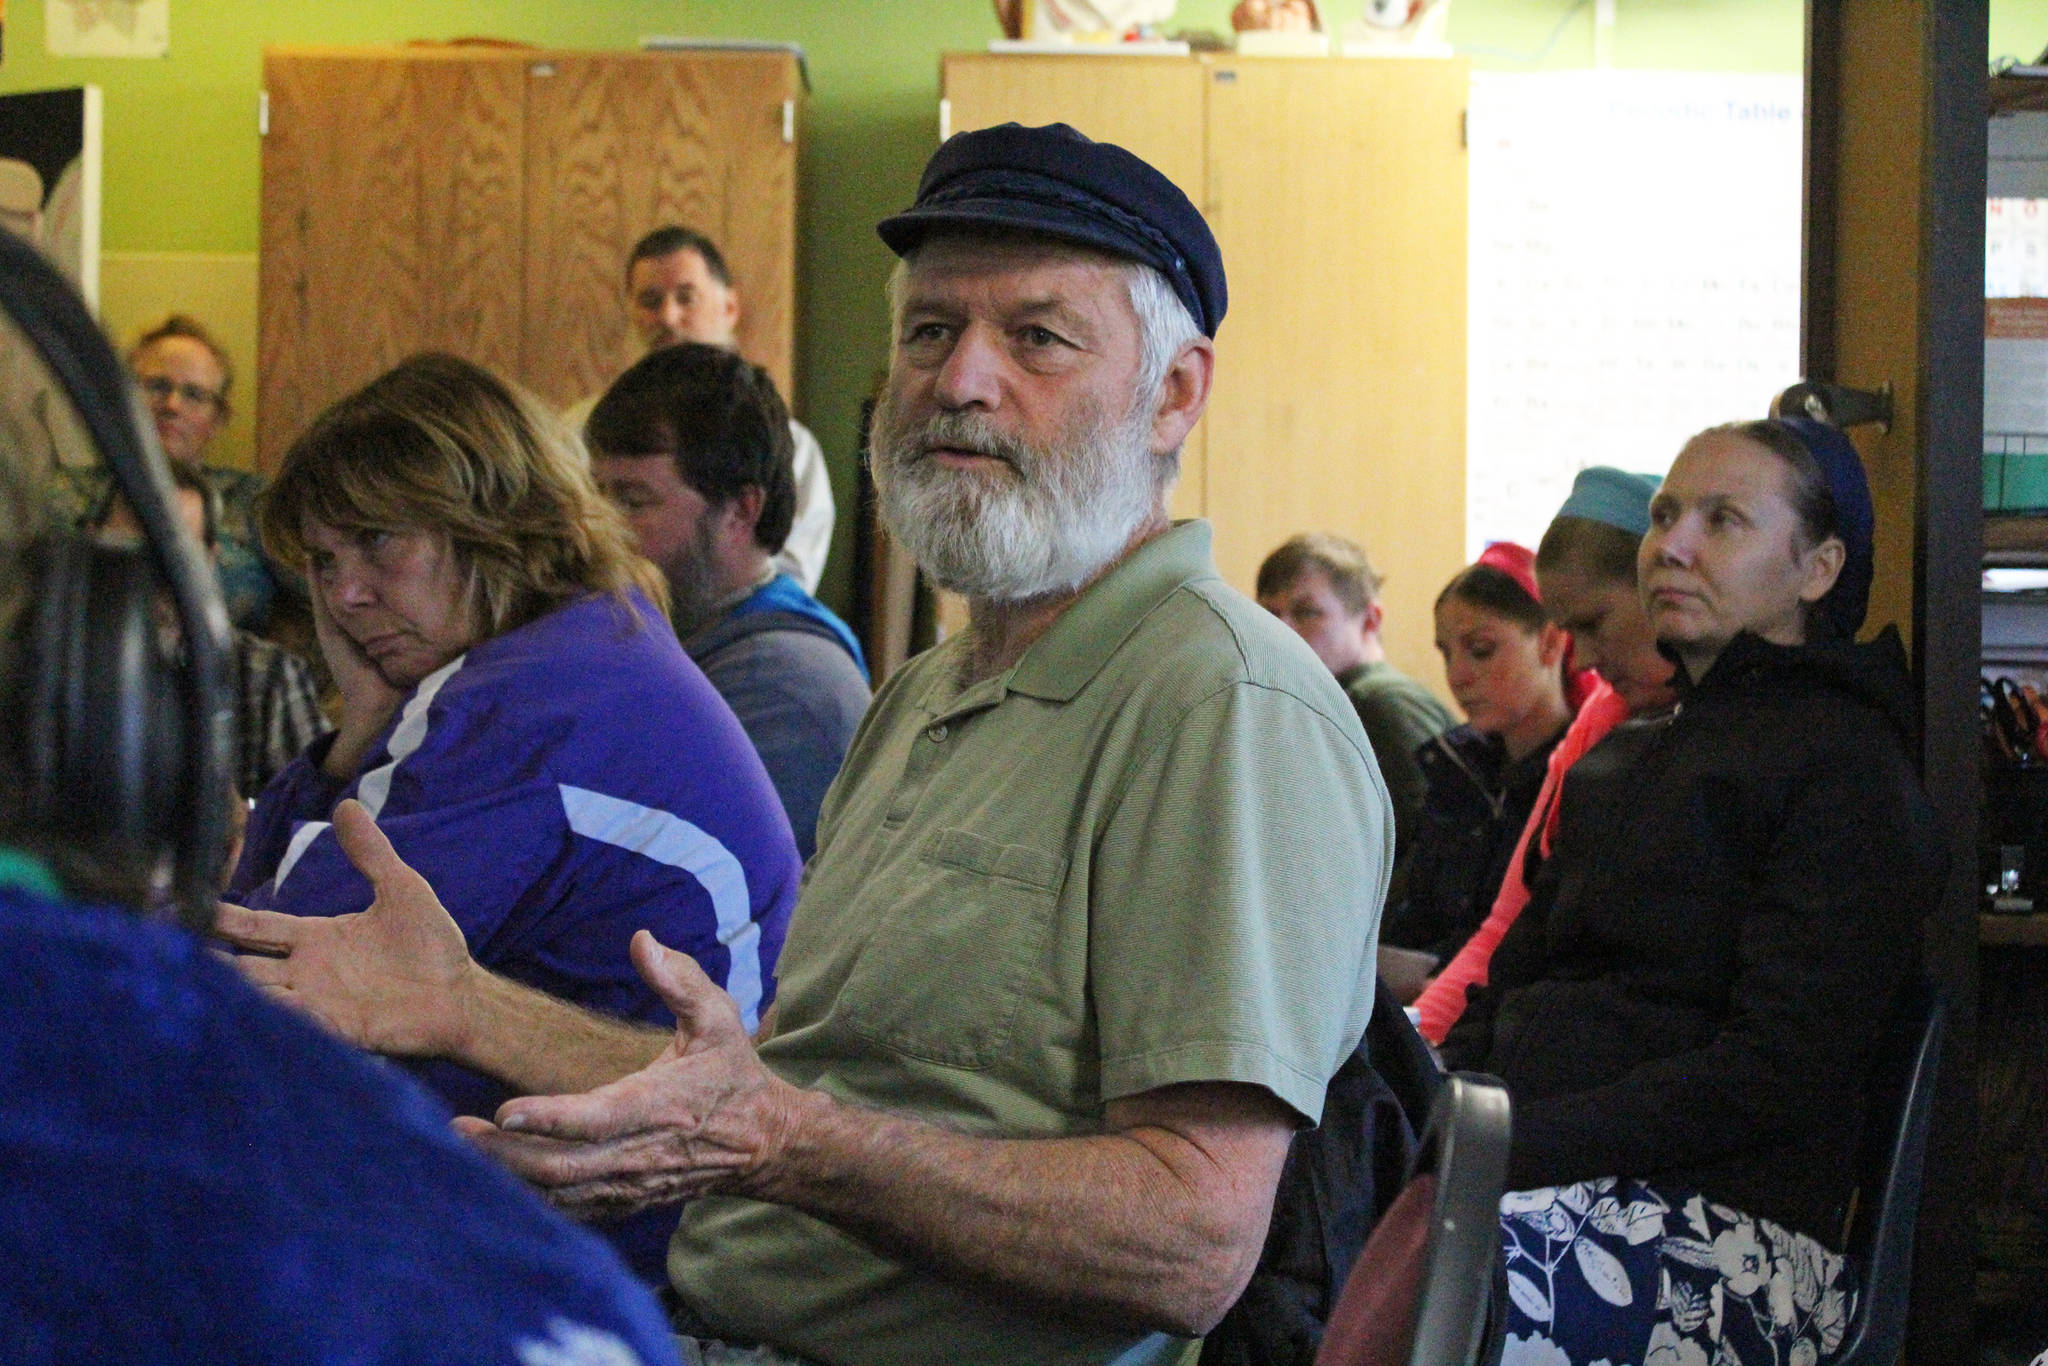 Rep. Paul Seaton speaks during a community meeting Thursday, Aug. 30, 2018 at the middle-high school building in Kachemak Selo, Alaska. Kenai Peninsula Borough, school district and government representatives were there to share information on a proposed new school for the community and answer questions. (Photo by Megan Pacer/Homer News)